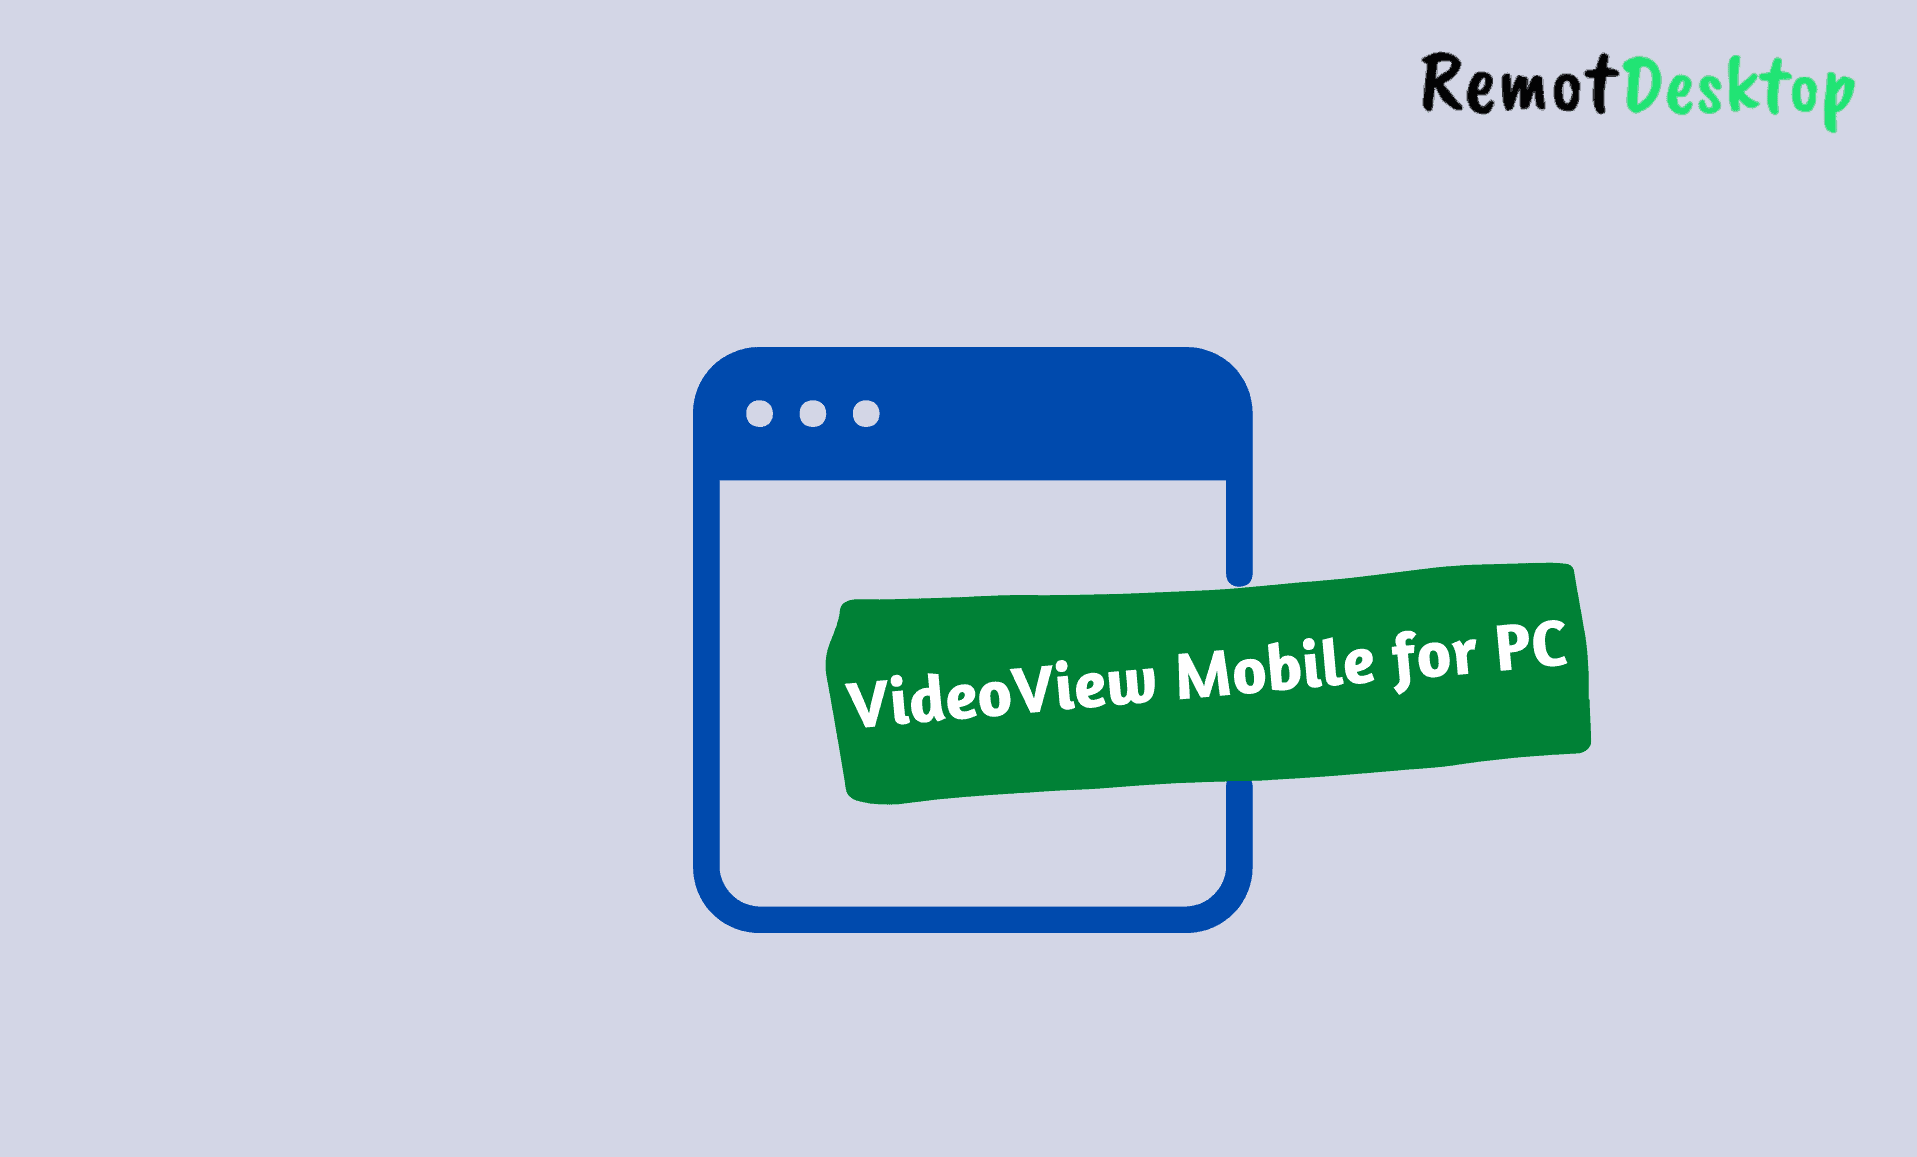 VideoView Mobile for PC